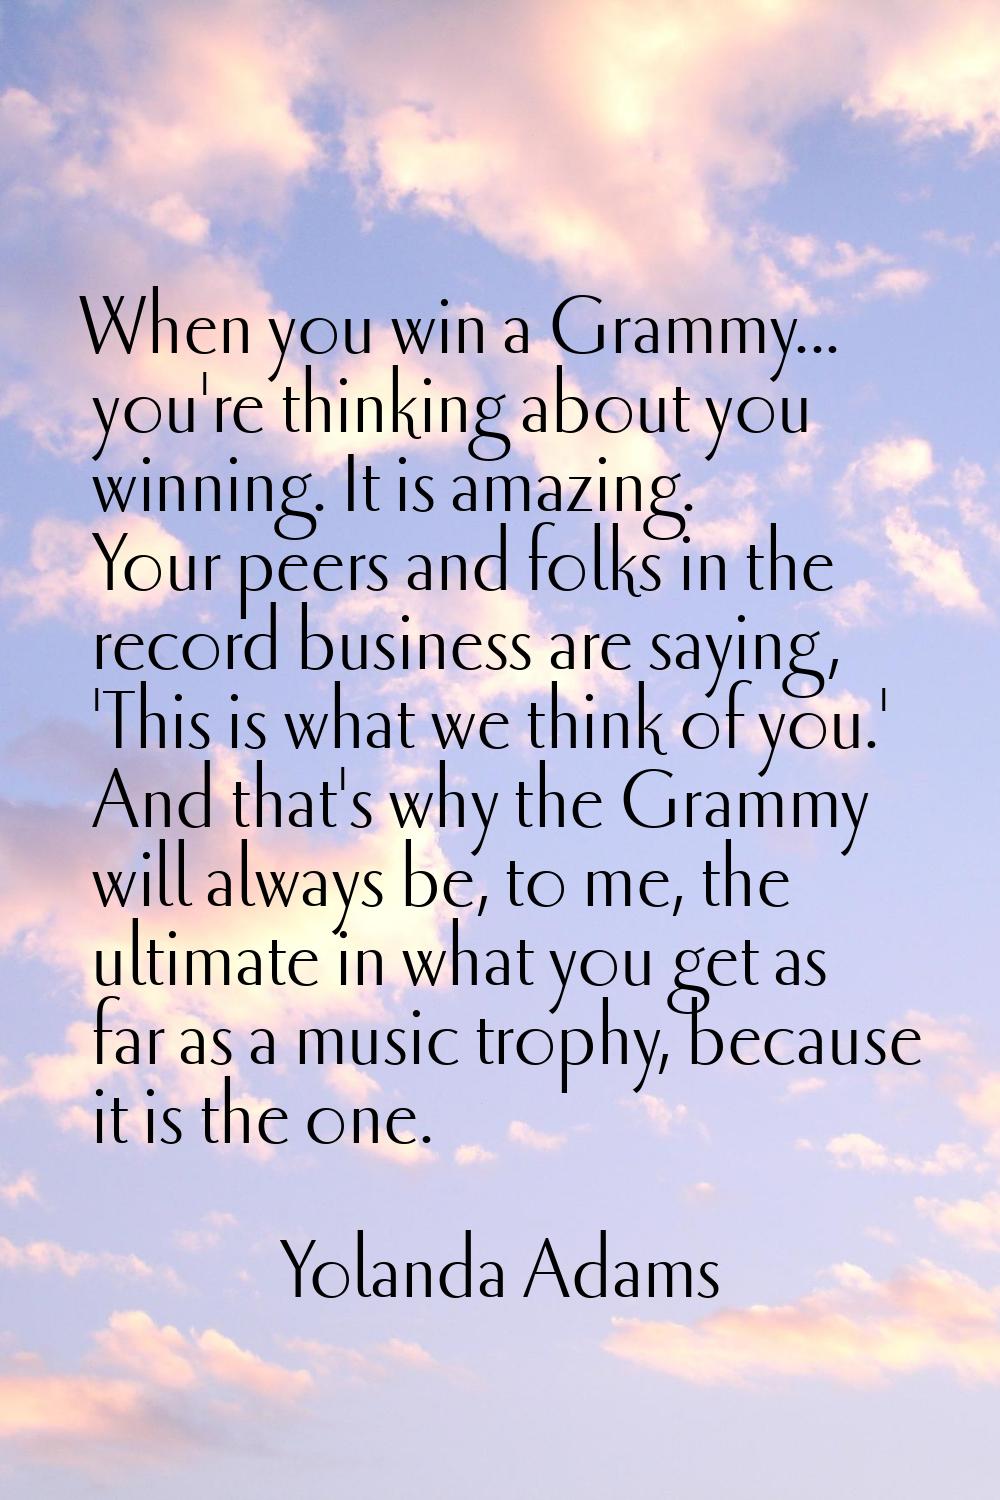 When you win a Grammy... you're thinking about you winning. It is amazing. Your peers and folks in 